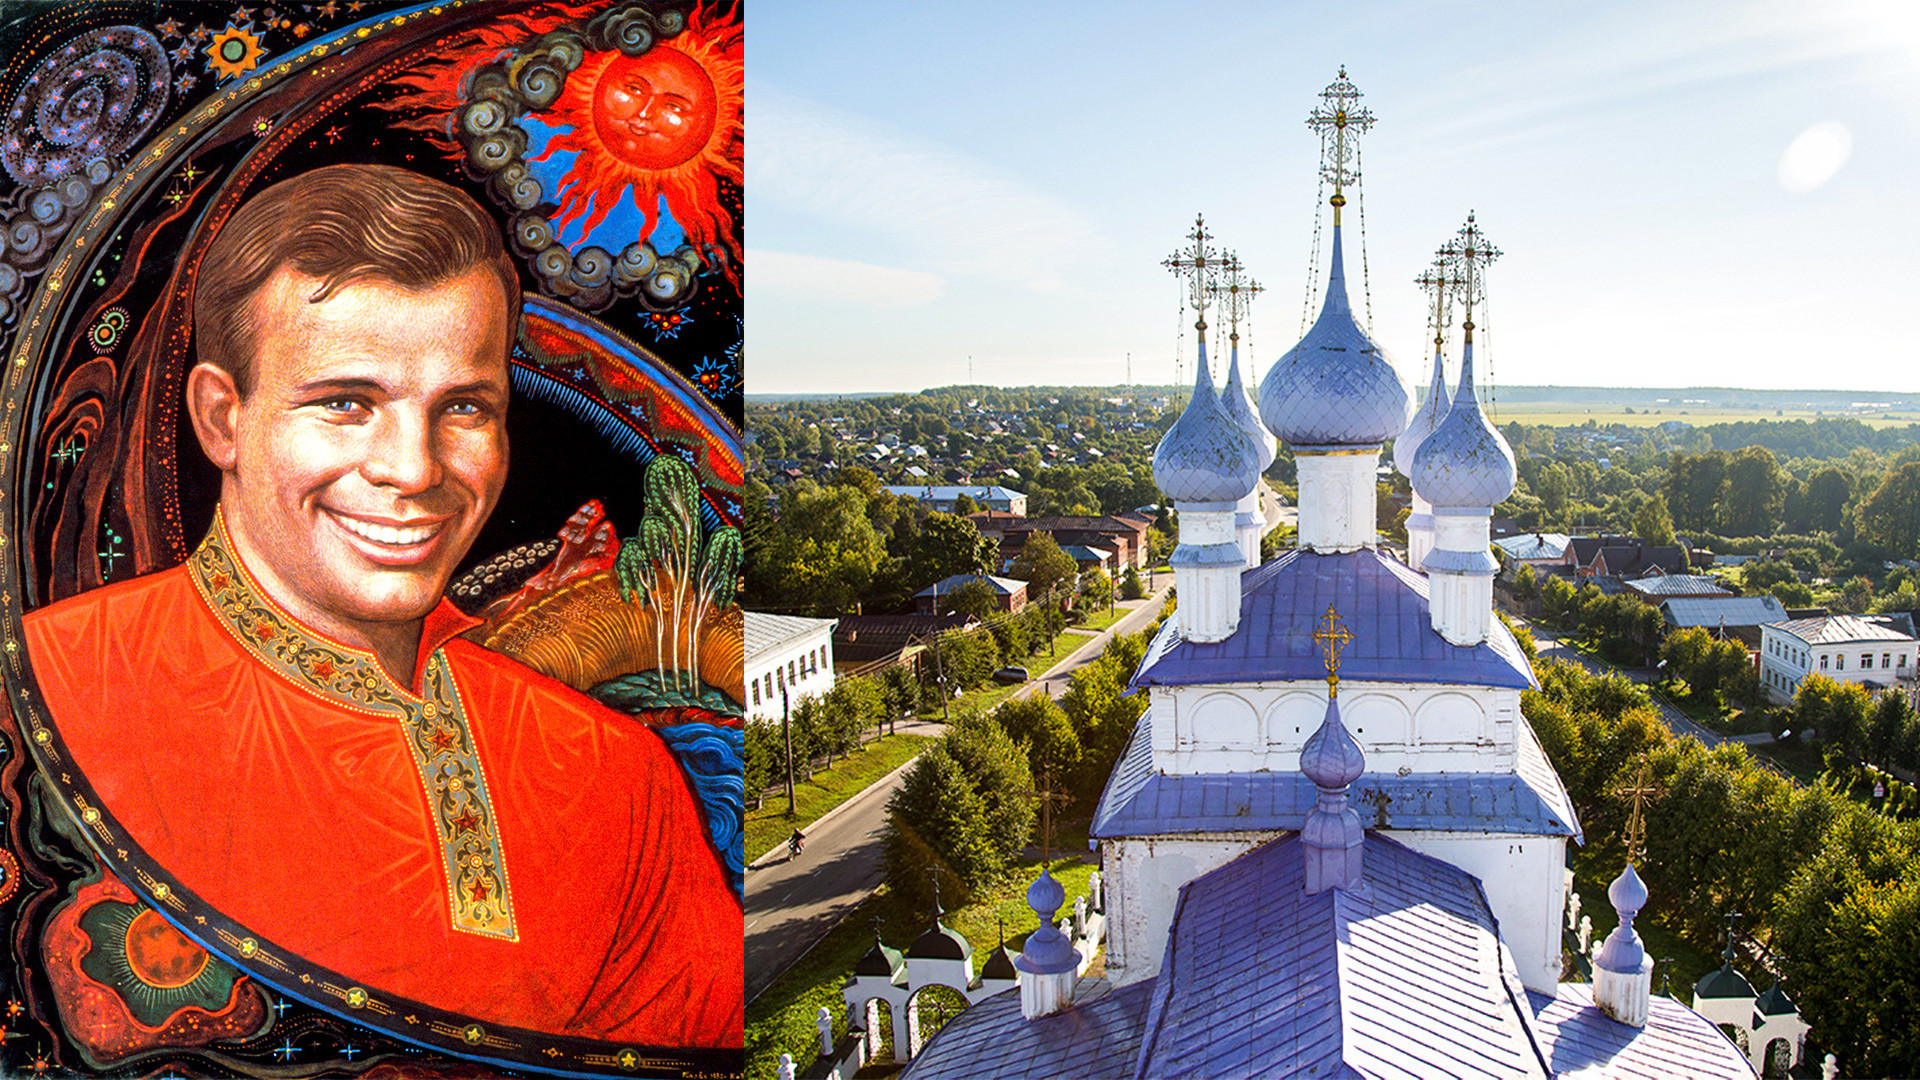 Yury Gagarin in the traditional Palekh style and the view of Palkeh's main church with violet domes.